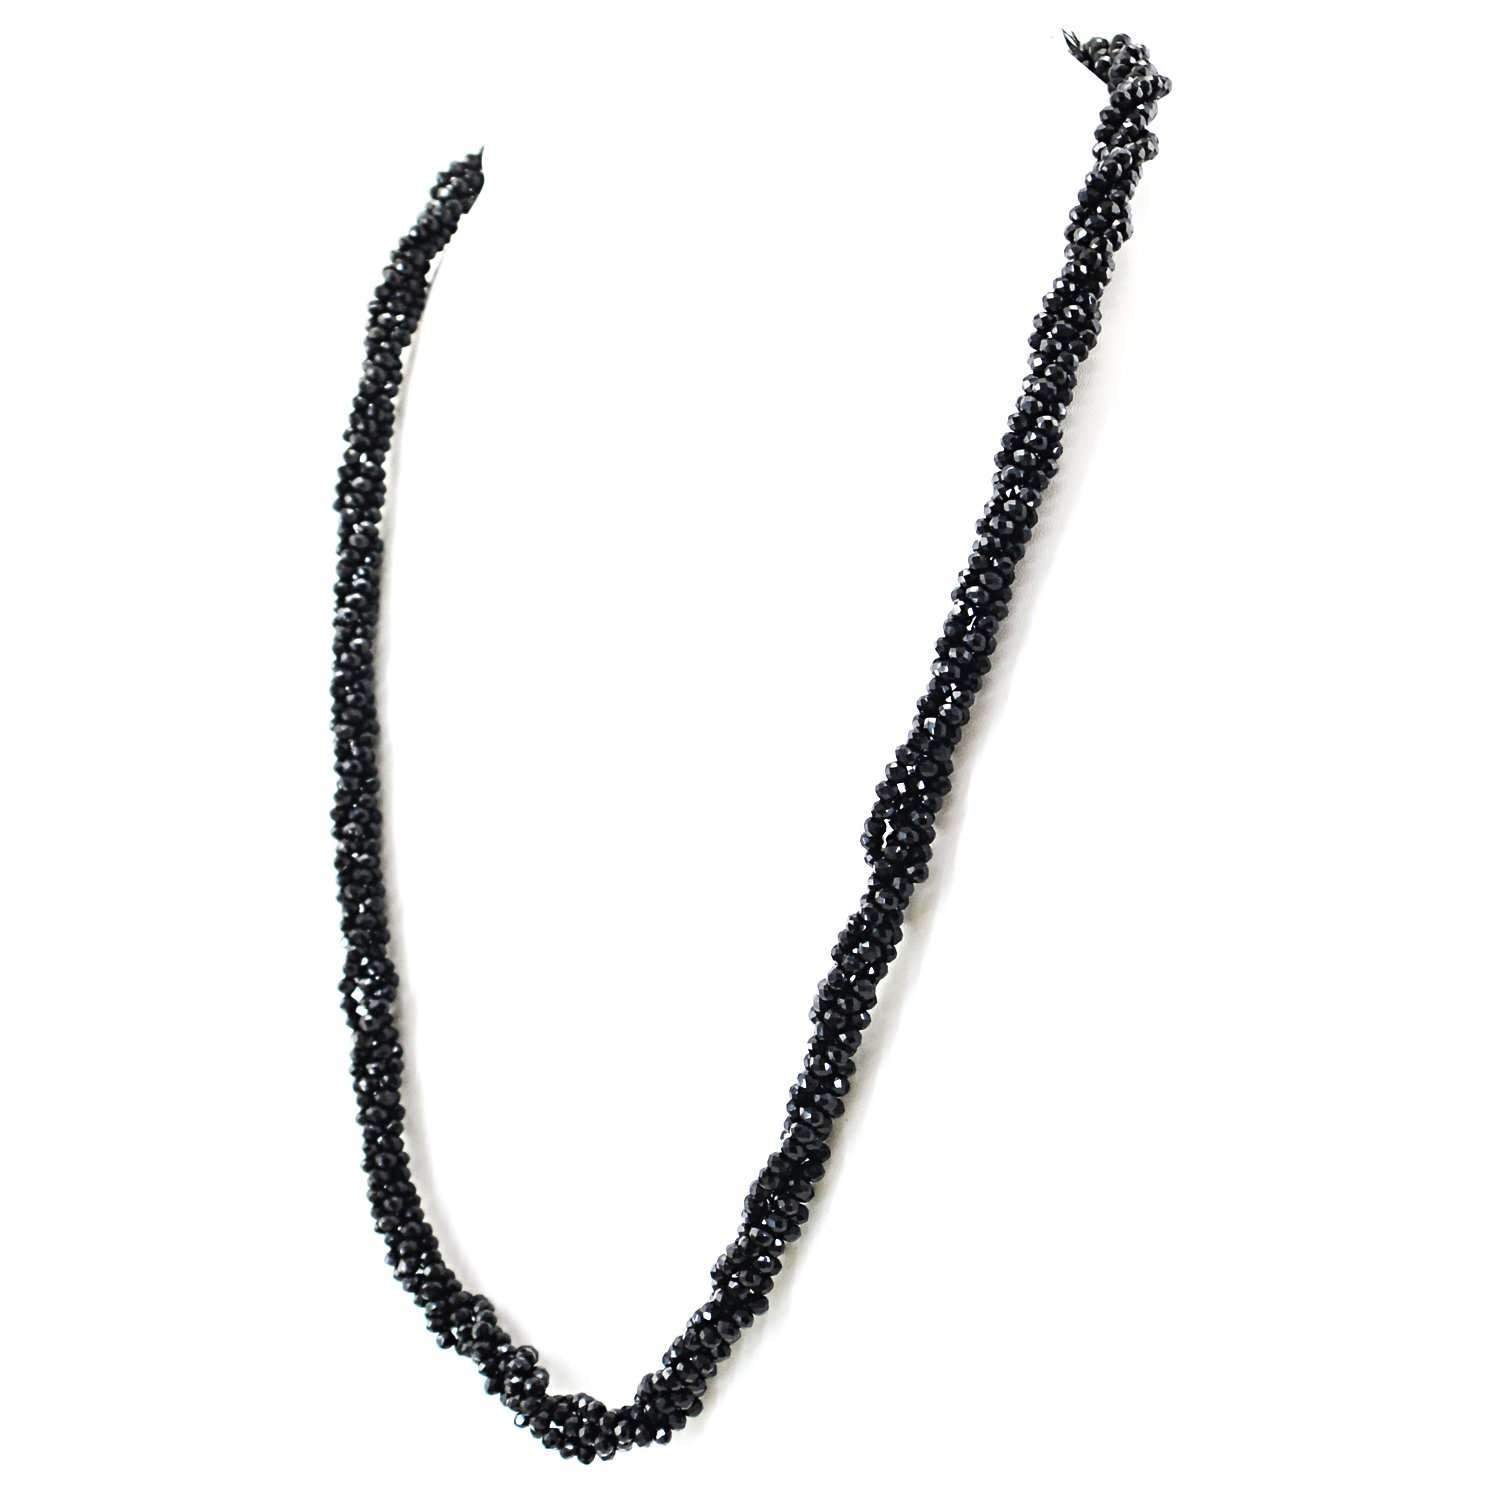 gemsmore:Natural Black Spinel Necklace Faceted Round Beads - 20 Inches Long